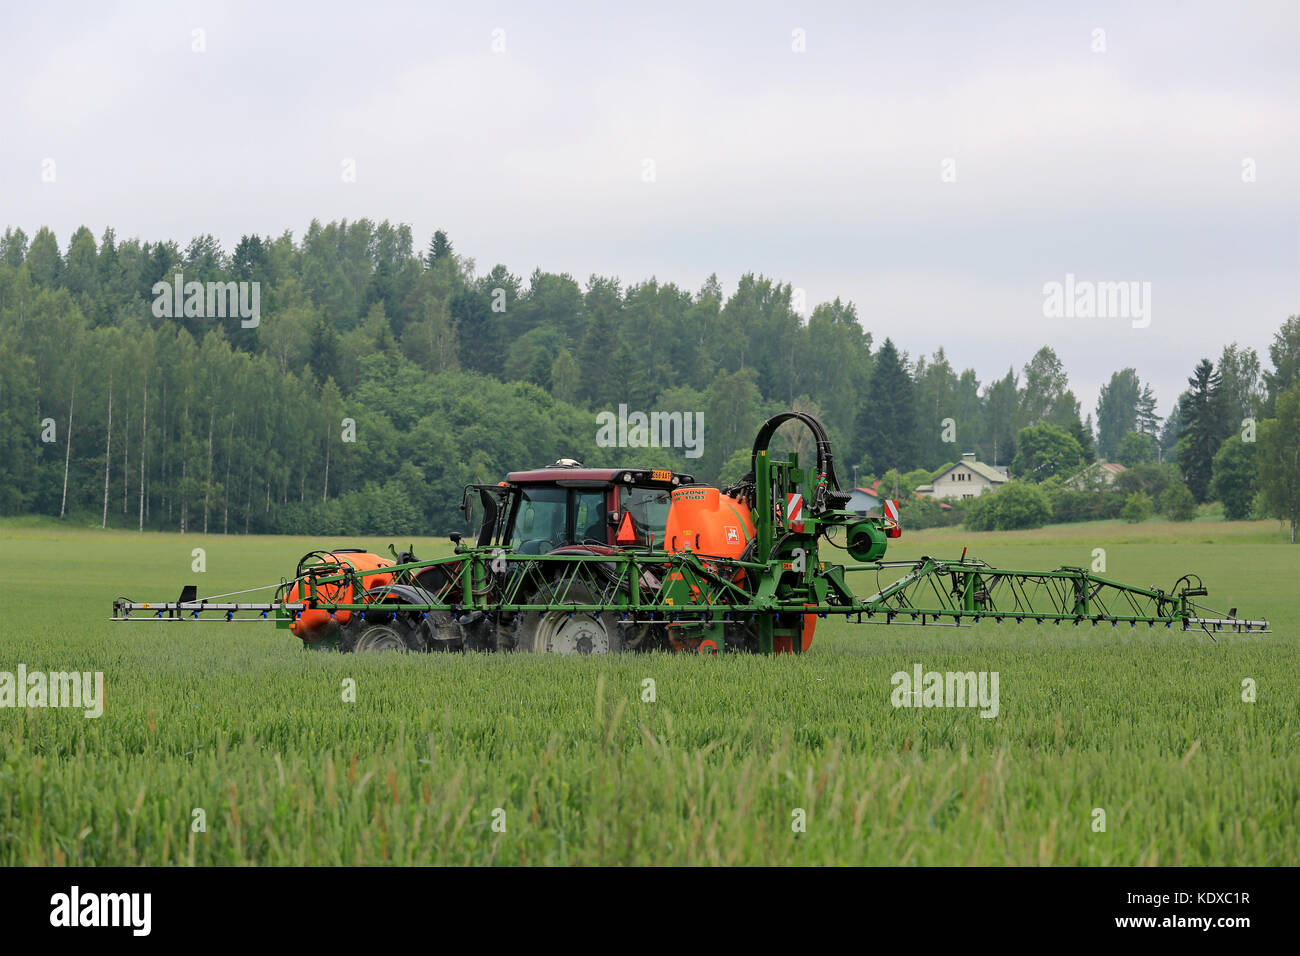 SALO, FINLAND - JUNE 25, 2016: Farmer sprays wheat field with Valtra tractor and Amazone 1501 UF mounted sprayer in June in South of Finland. Stock Photo